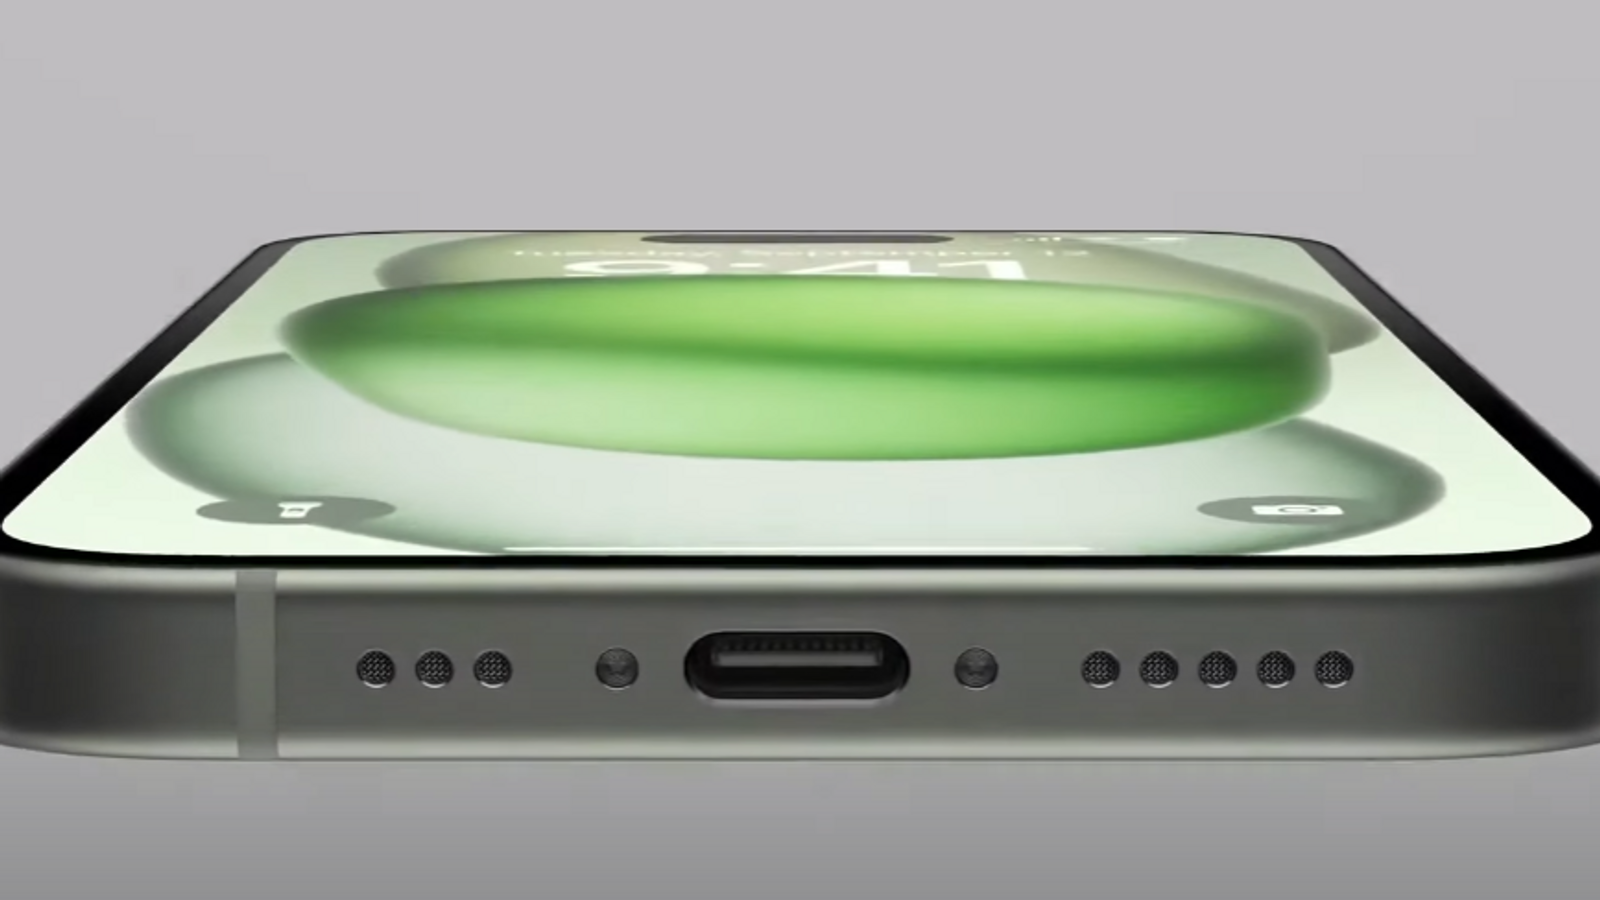 Apple reveals iPhone 15 with USB-C charging port to comply with EU rules | Science & Tech News